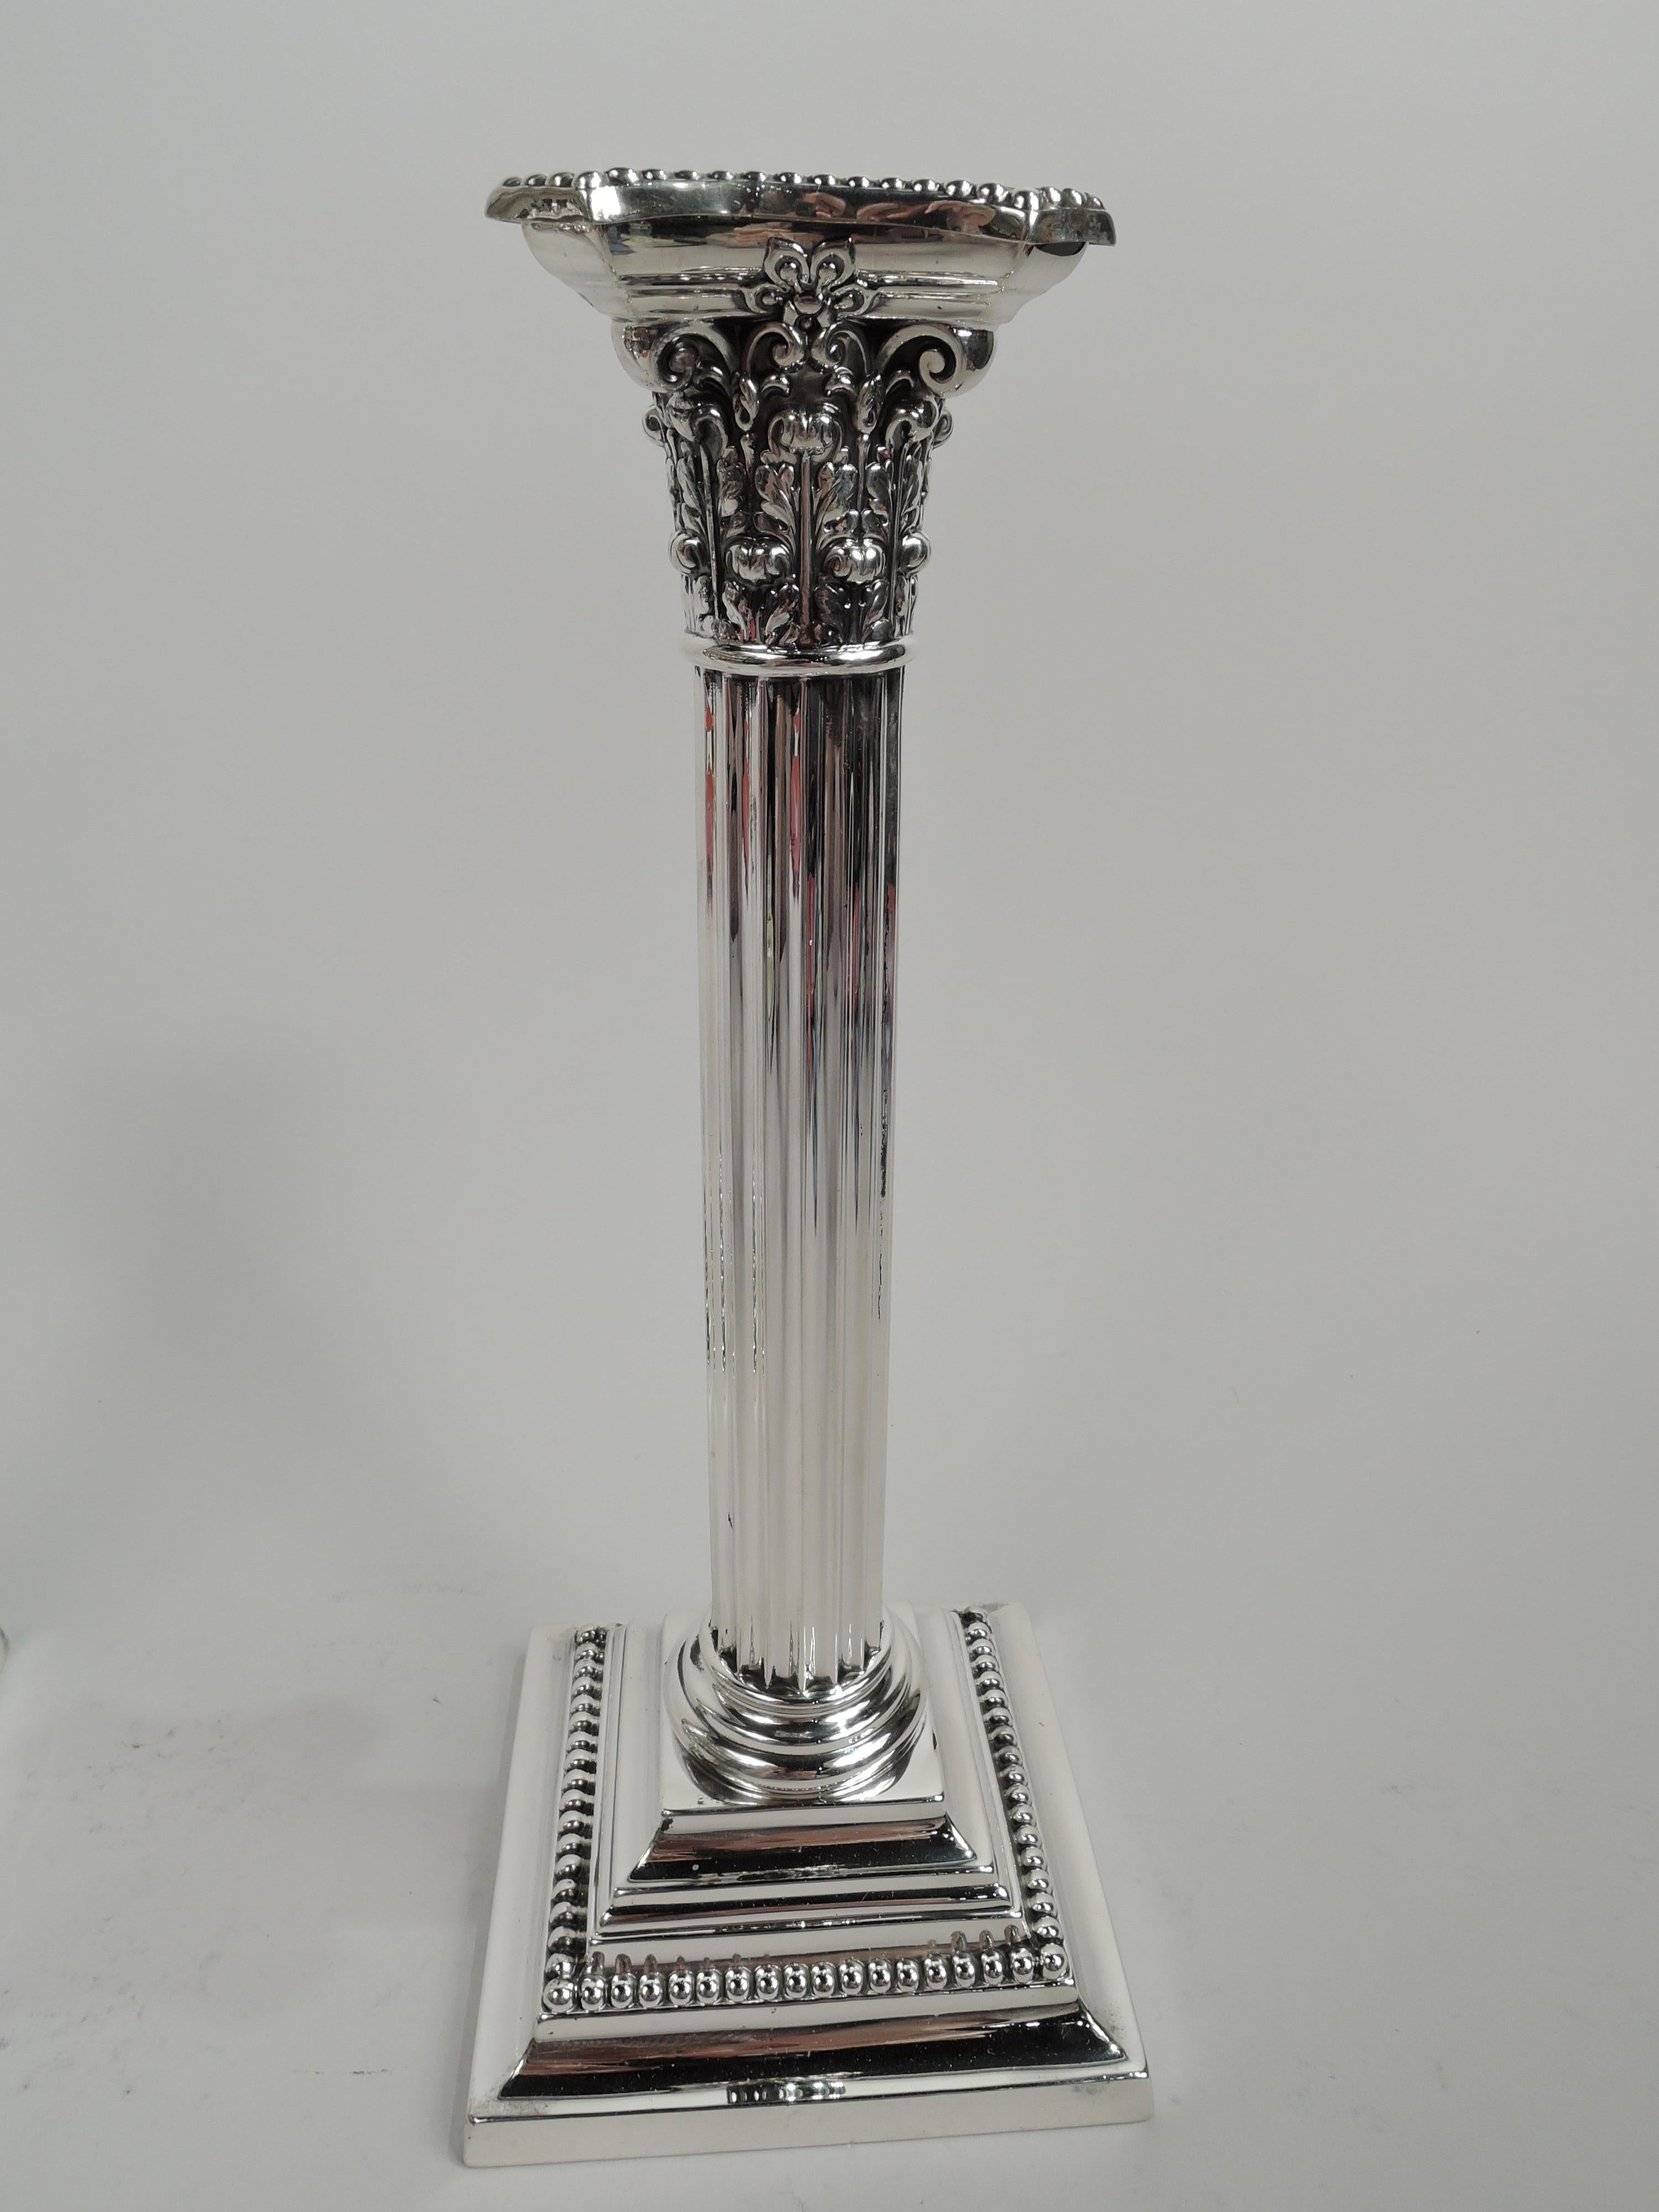 Pair of classical sterling silver candlesticks. Made by Gorham in Providence in 1909. Each: Fluted column and composite Corinthian capital. Bobeche detachable with chamfered rim. Stepped and square base. Beading. Fully marked including no. A3207 and